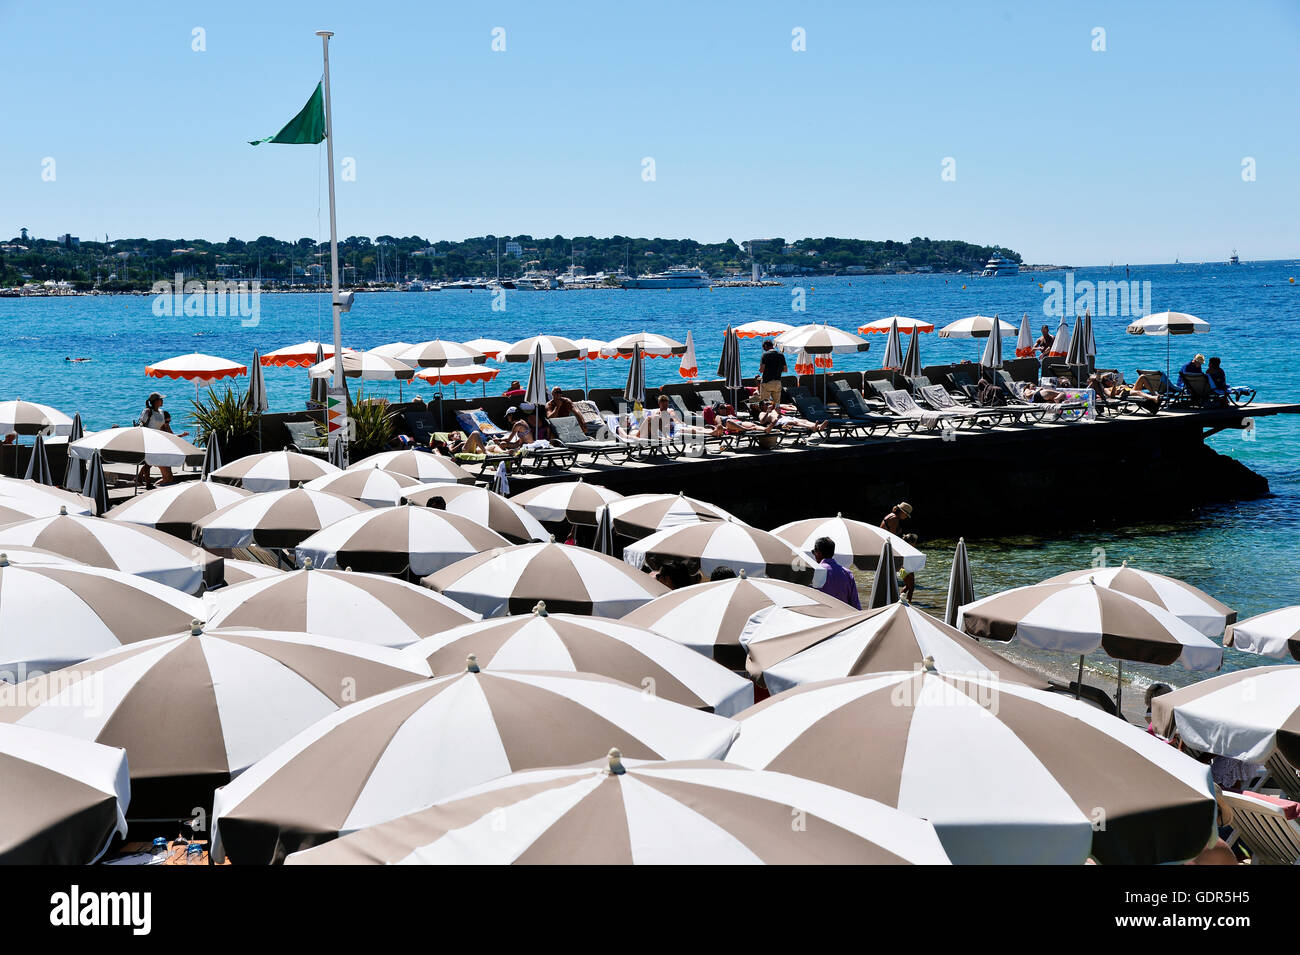 Sea front, Juan les pins, french riviera, france, private beach Stock Photo